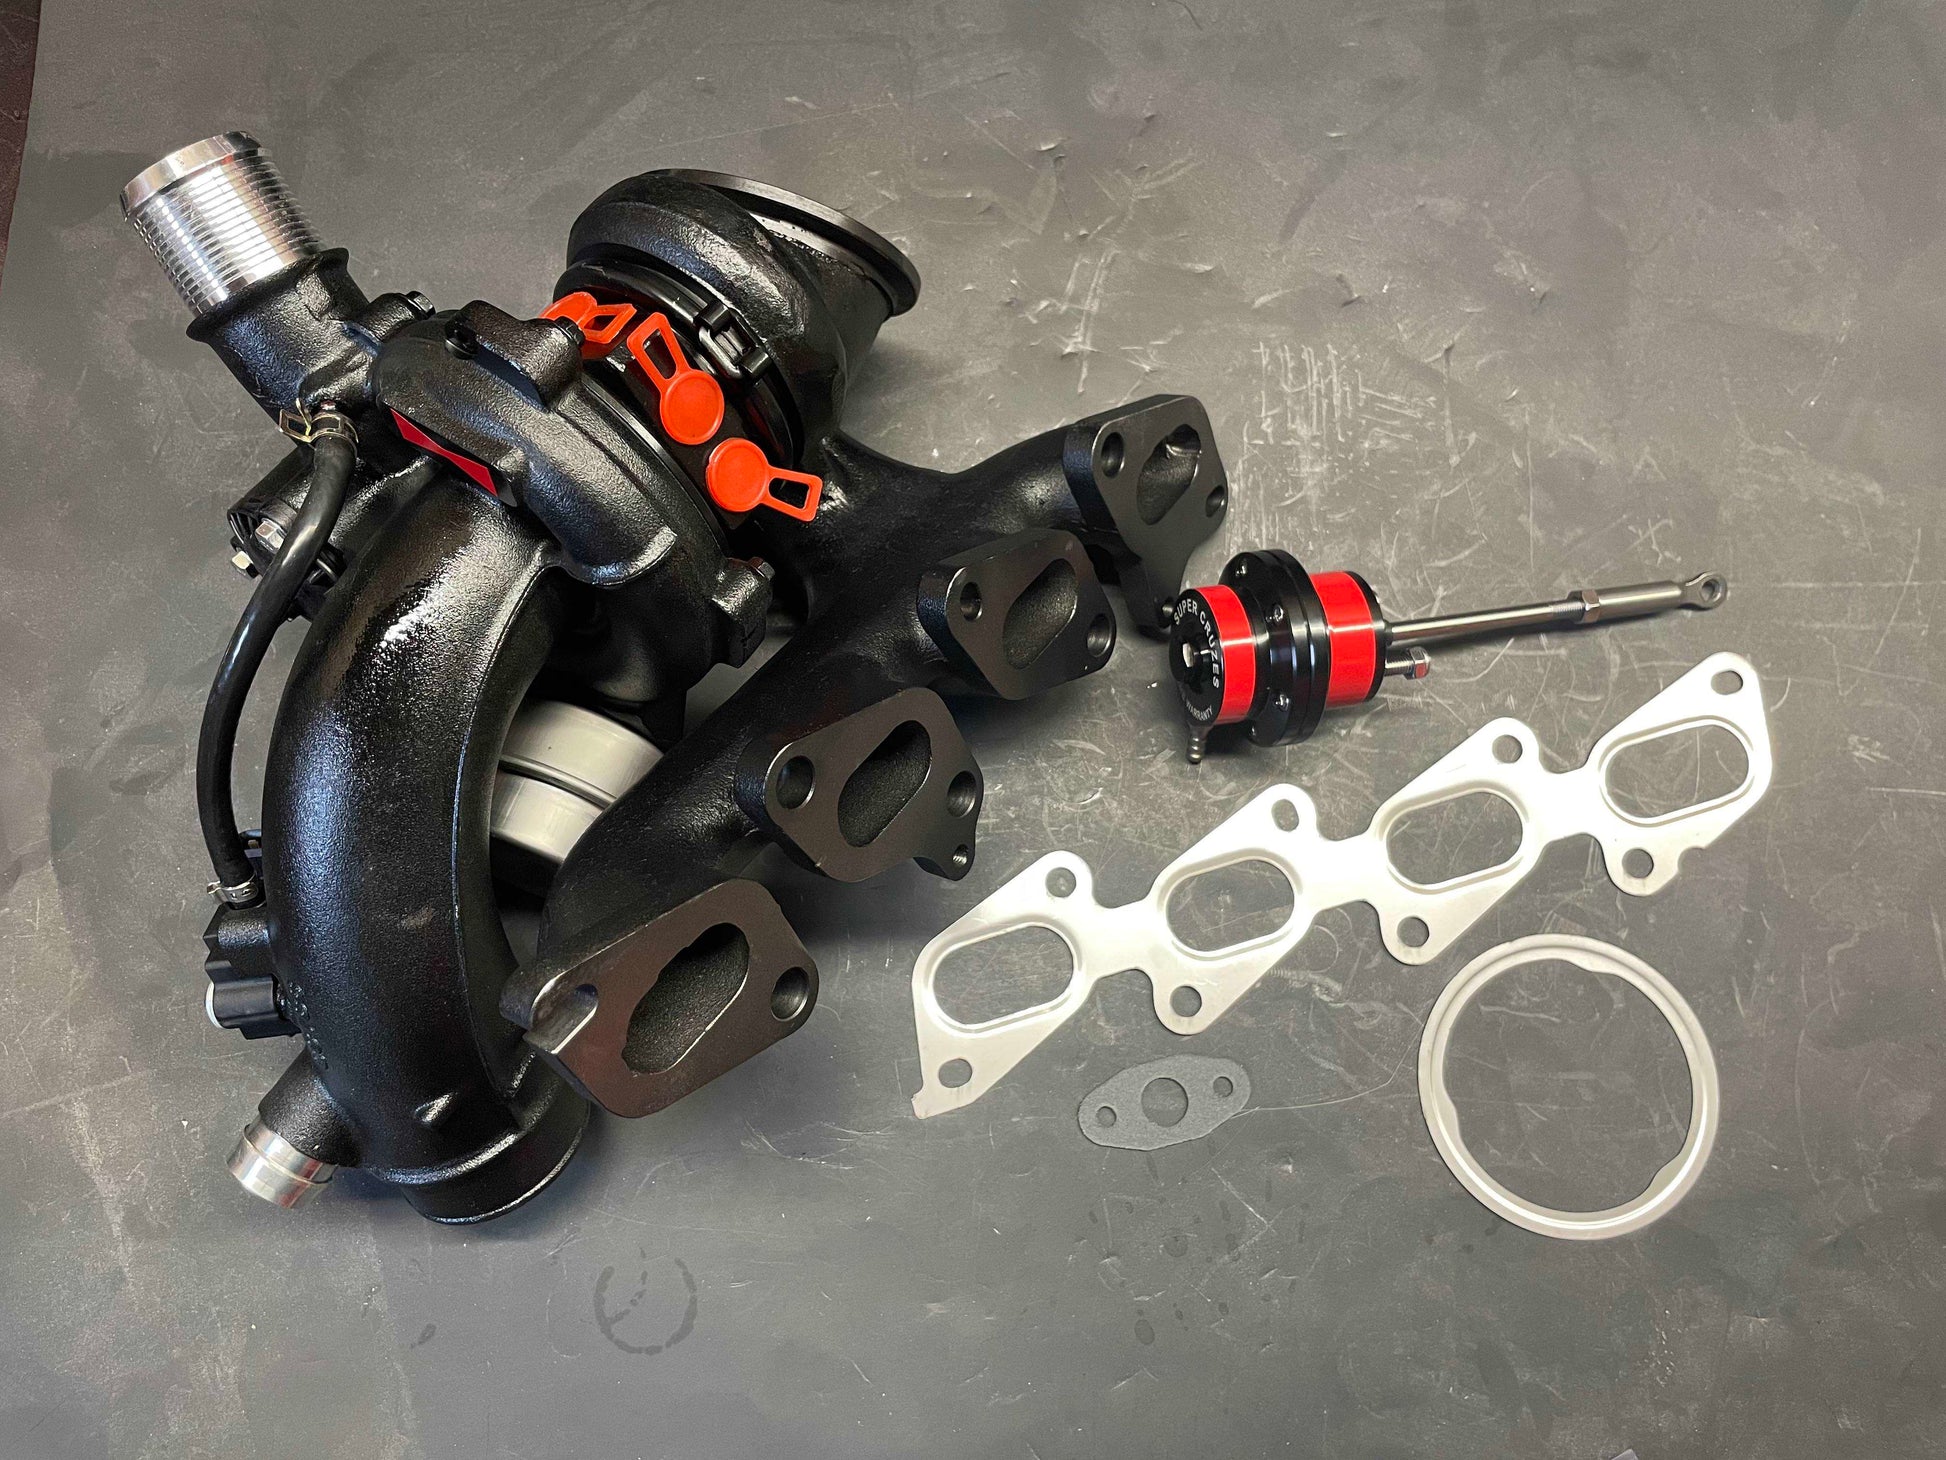 1.4 CRUZE Sonic Trax turbo upgrades 2010 and up   Fitment chart  LUJ/LUV/A14NET engine: 2011-2016 Limited 1.4L Cruze 2011-2019 Chevy Sonic/Aveo 2015+ Chevy Trax 2015+ Buick Encore 2011+ Opel/Vauxhall Corsa (Turbo only) 2009+ Opel/Vauxhall Astra J (Turbo only) 2010+ Opel/Vauxhall Meriva B 2011+ Opel/Vauxhall Zafira Tourer